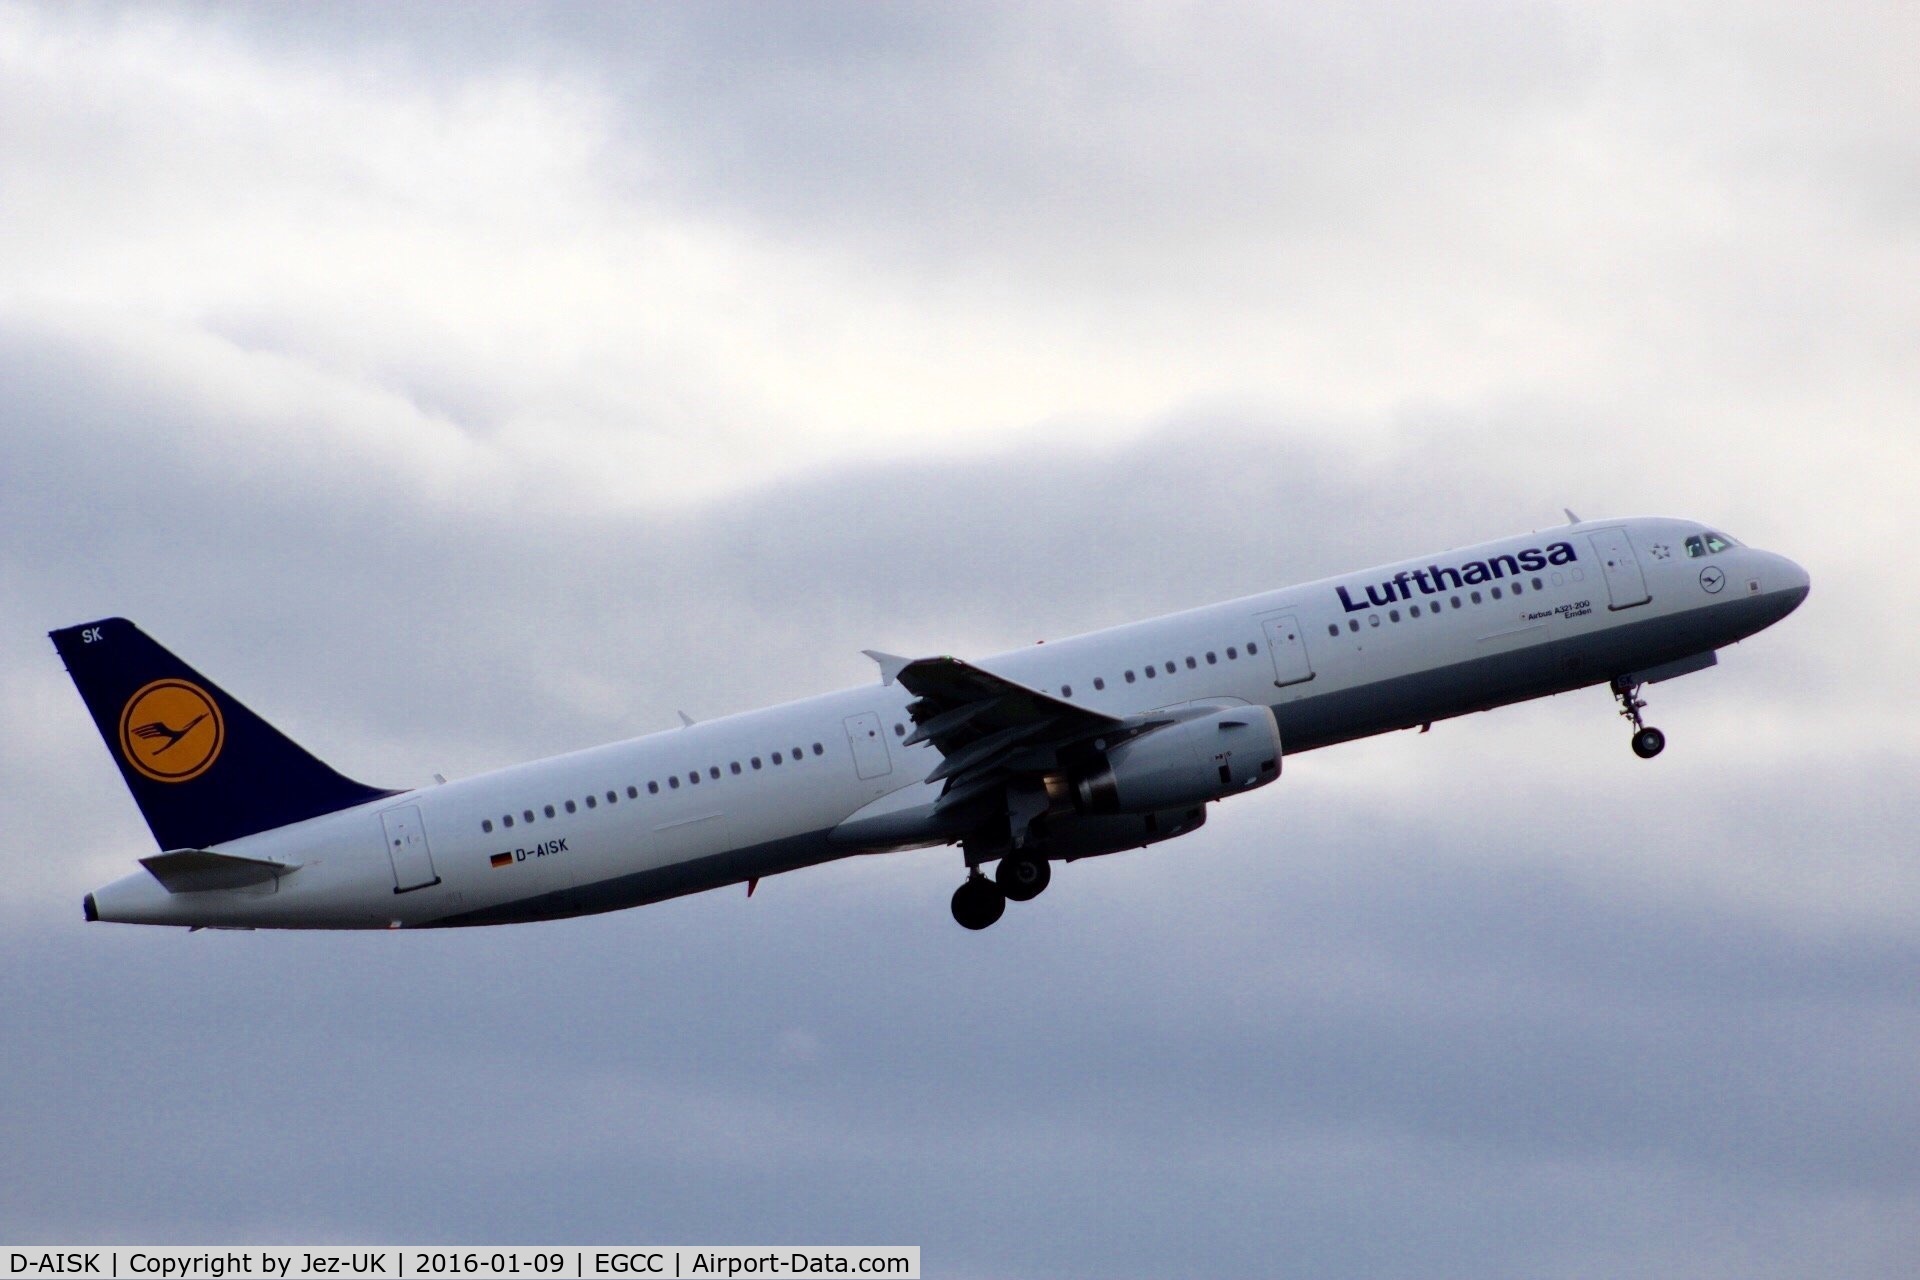 D-AISK, 2008 Airbus A321-231 C/N 3387, positive climbout of runway 23r, named Emden,